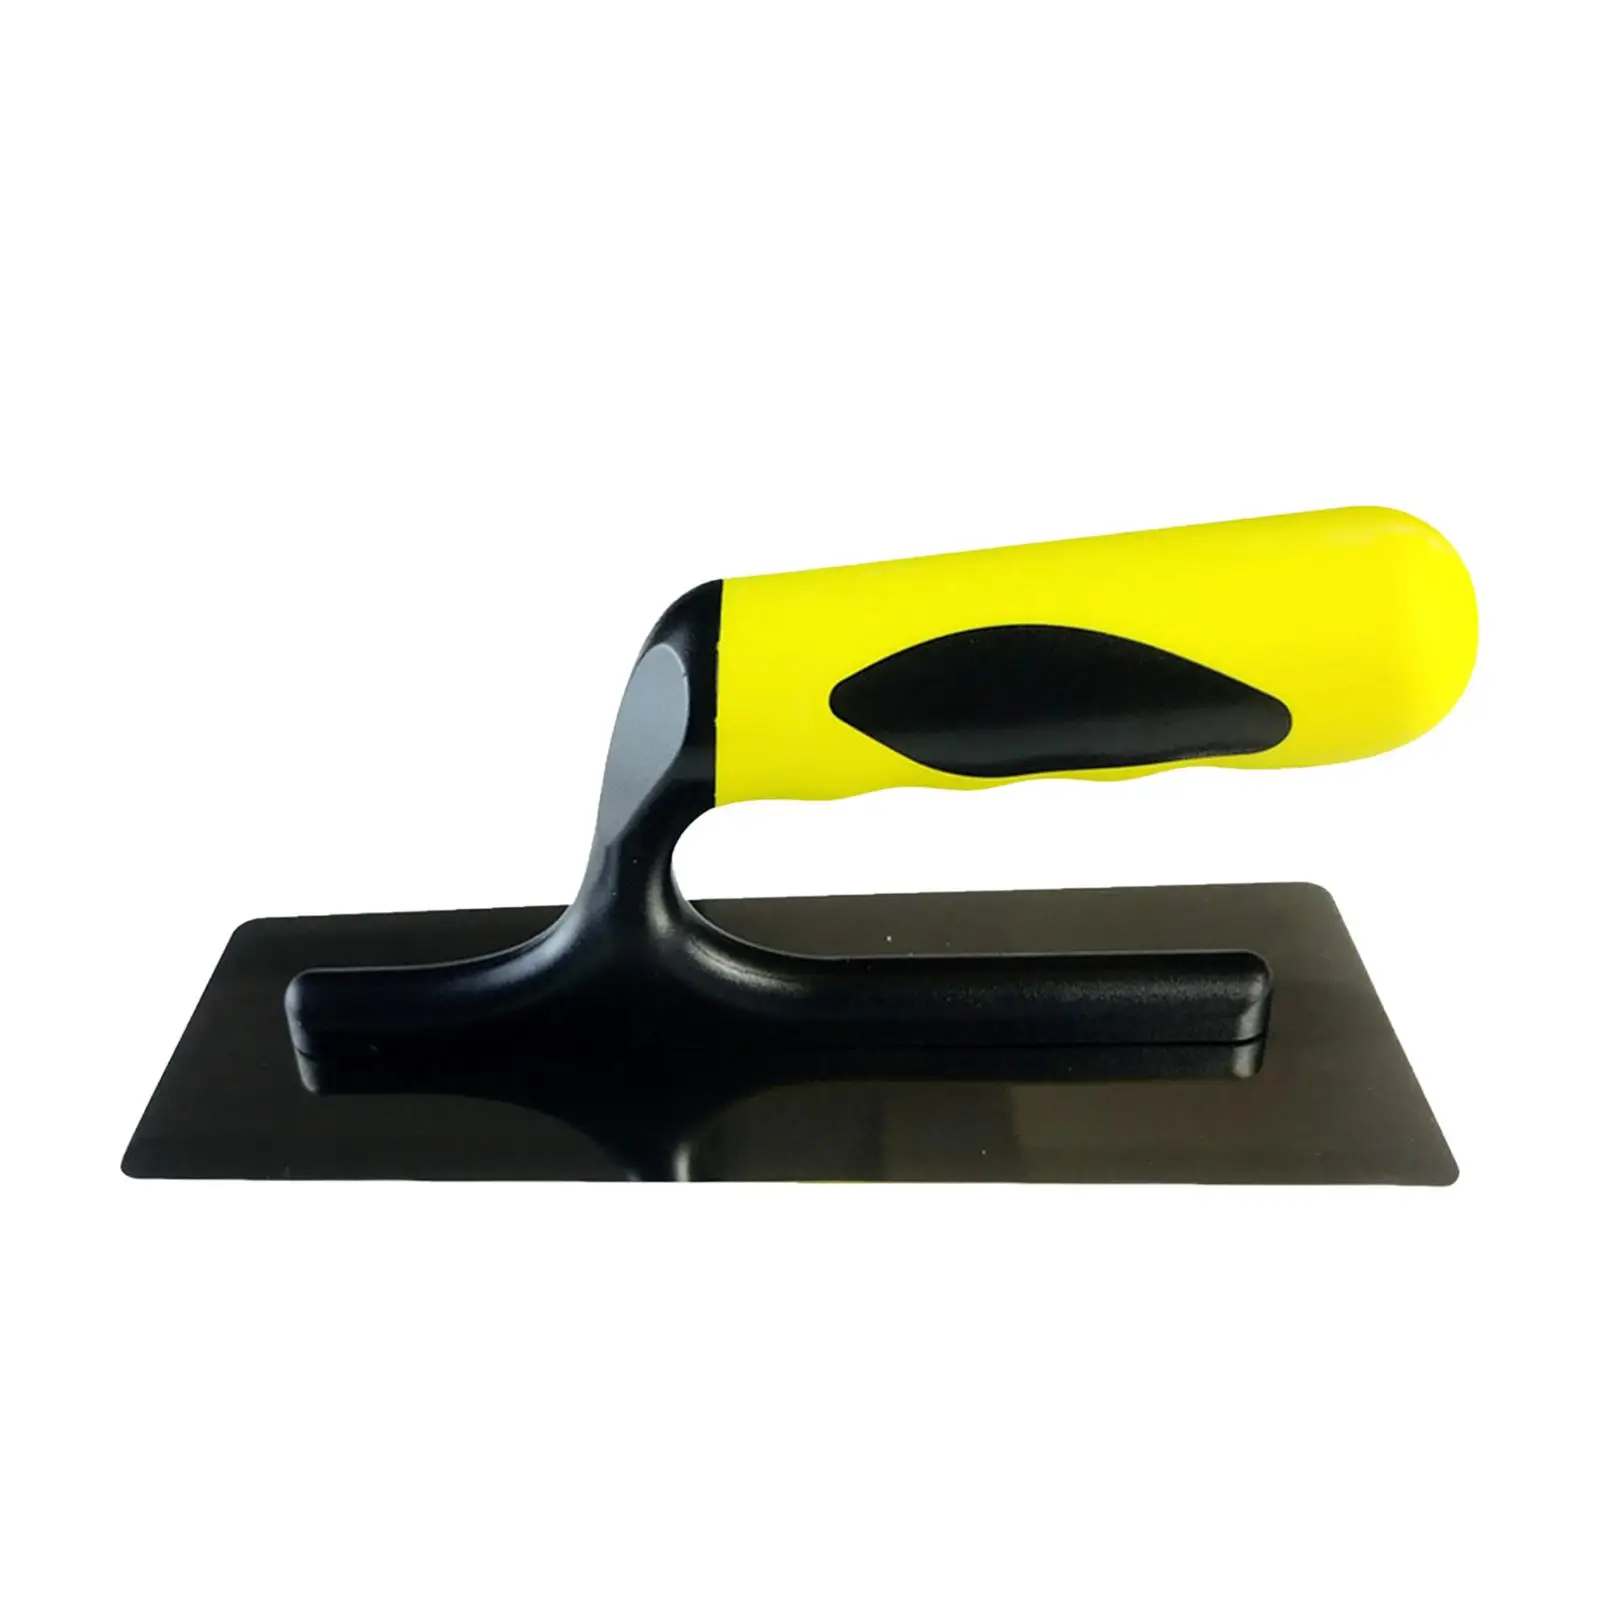 Finisher Plastering Trowel Spatula Knife Scraper for Drywall Scraping Cement